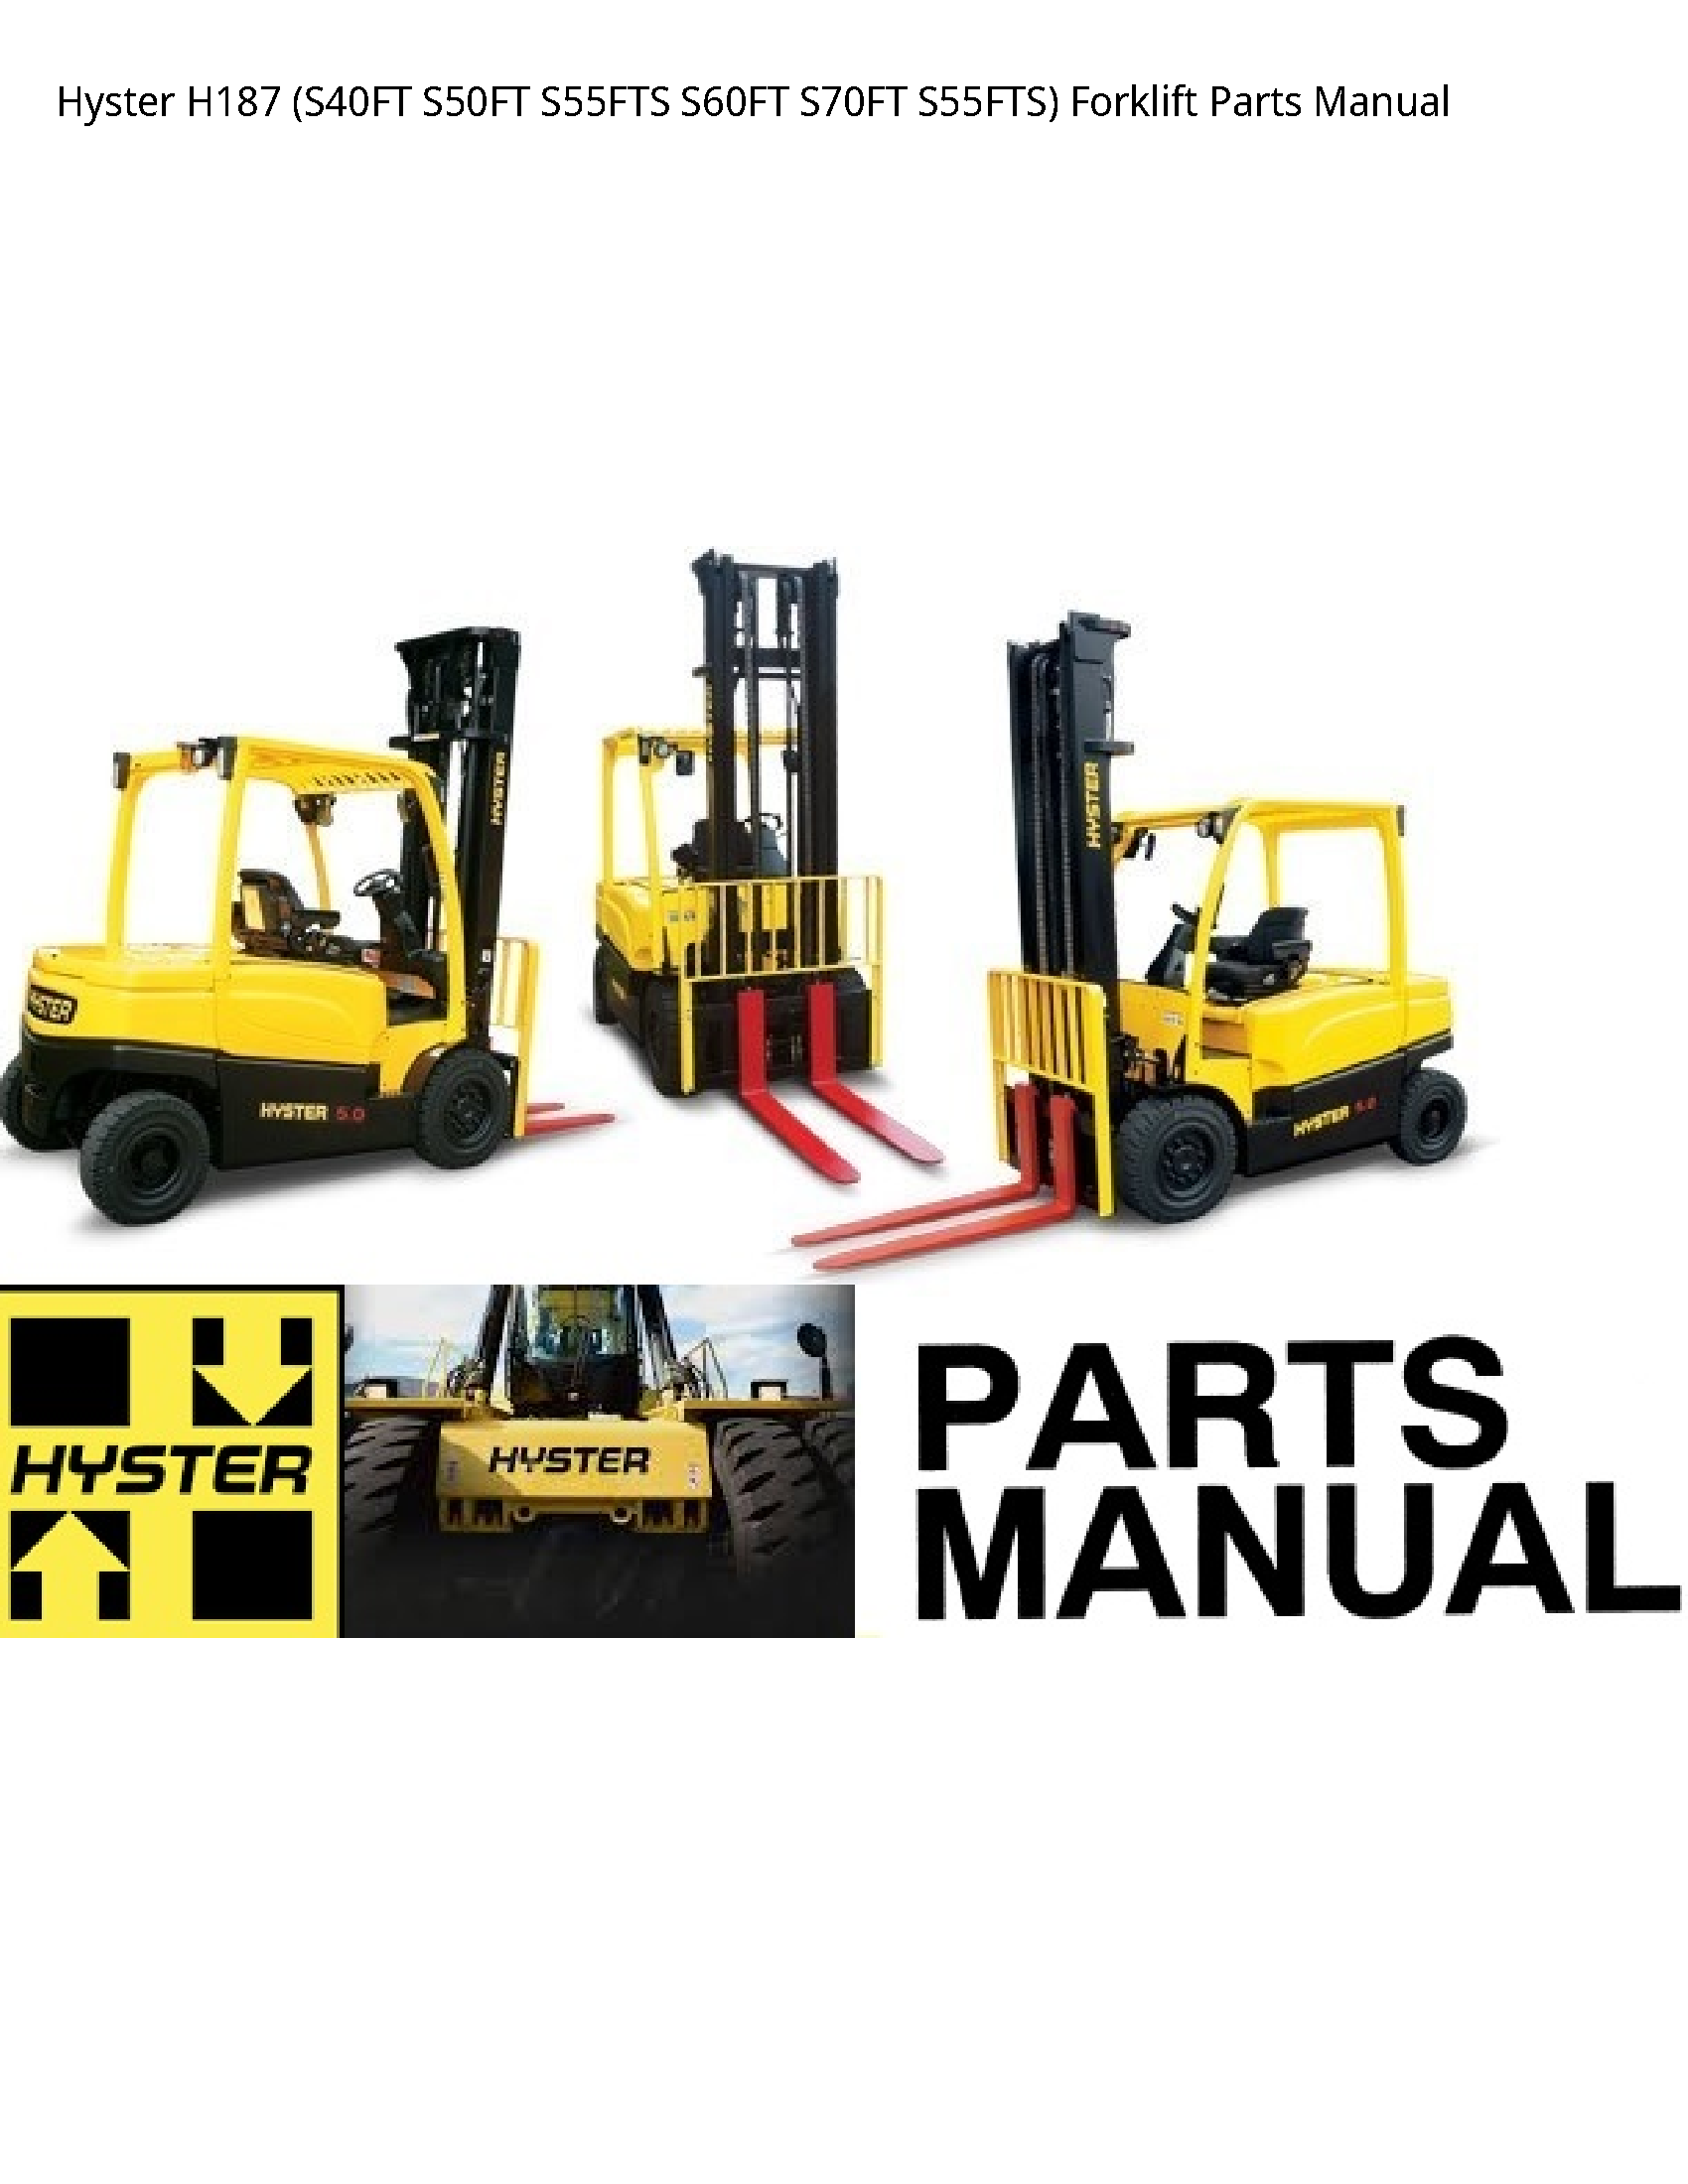 Hyster H187 Forklift Parts manual